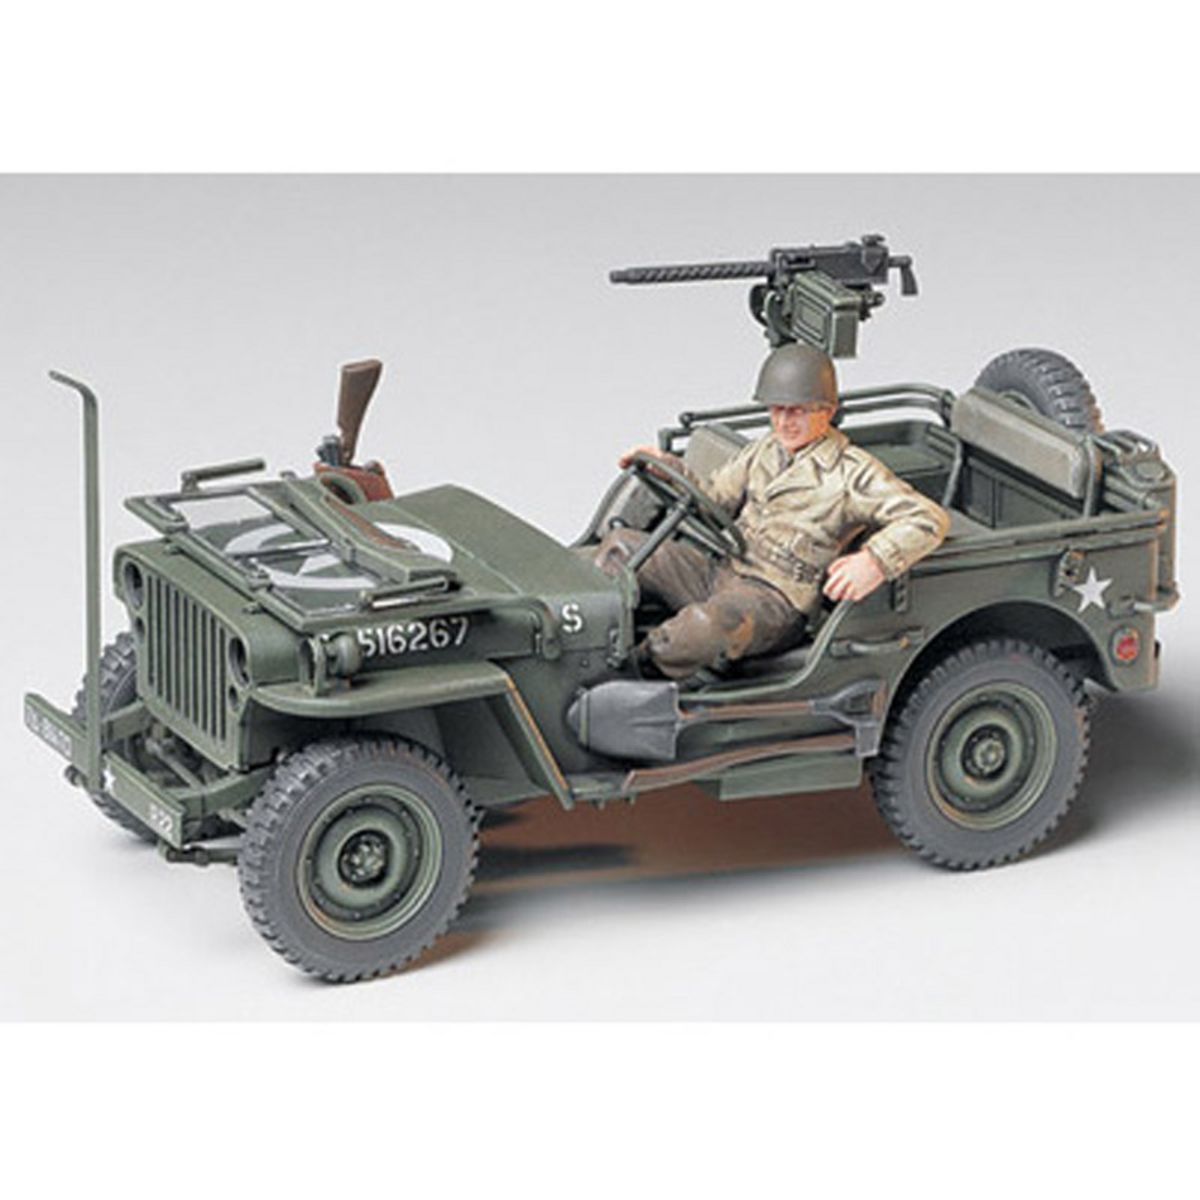 Tamiya Maquette véhicule militaire : Jeep Willys 1/4 Ton